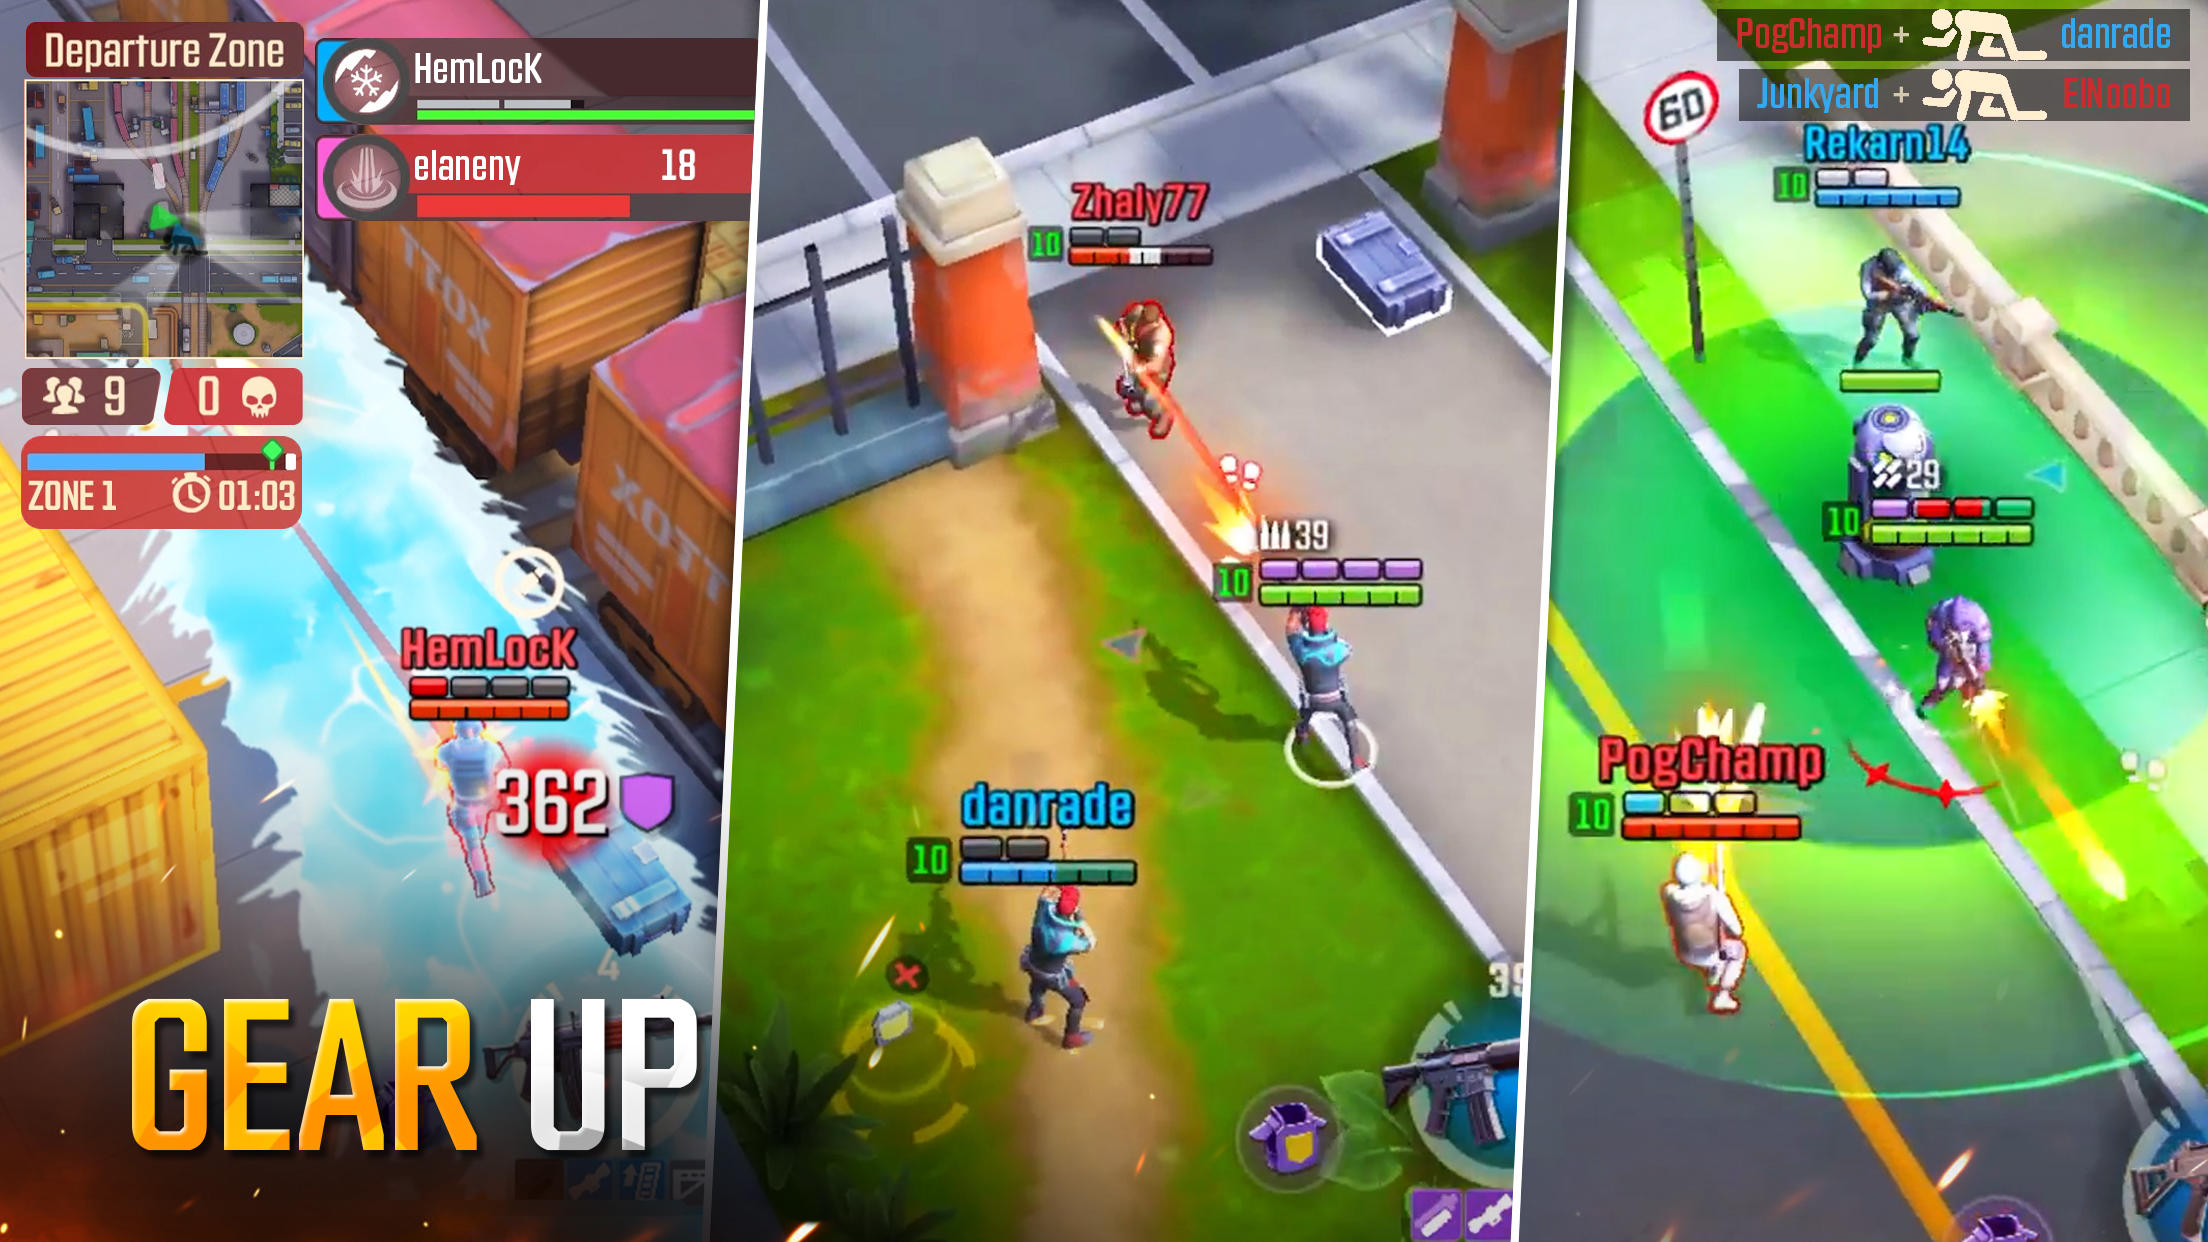 Screenshot of Outfire: Battle Royale Shooter